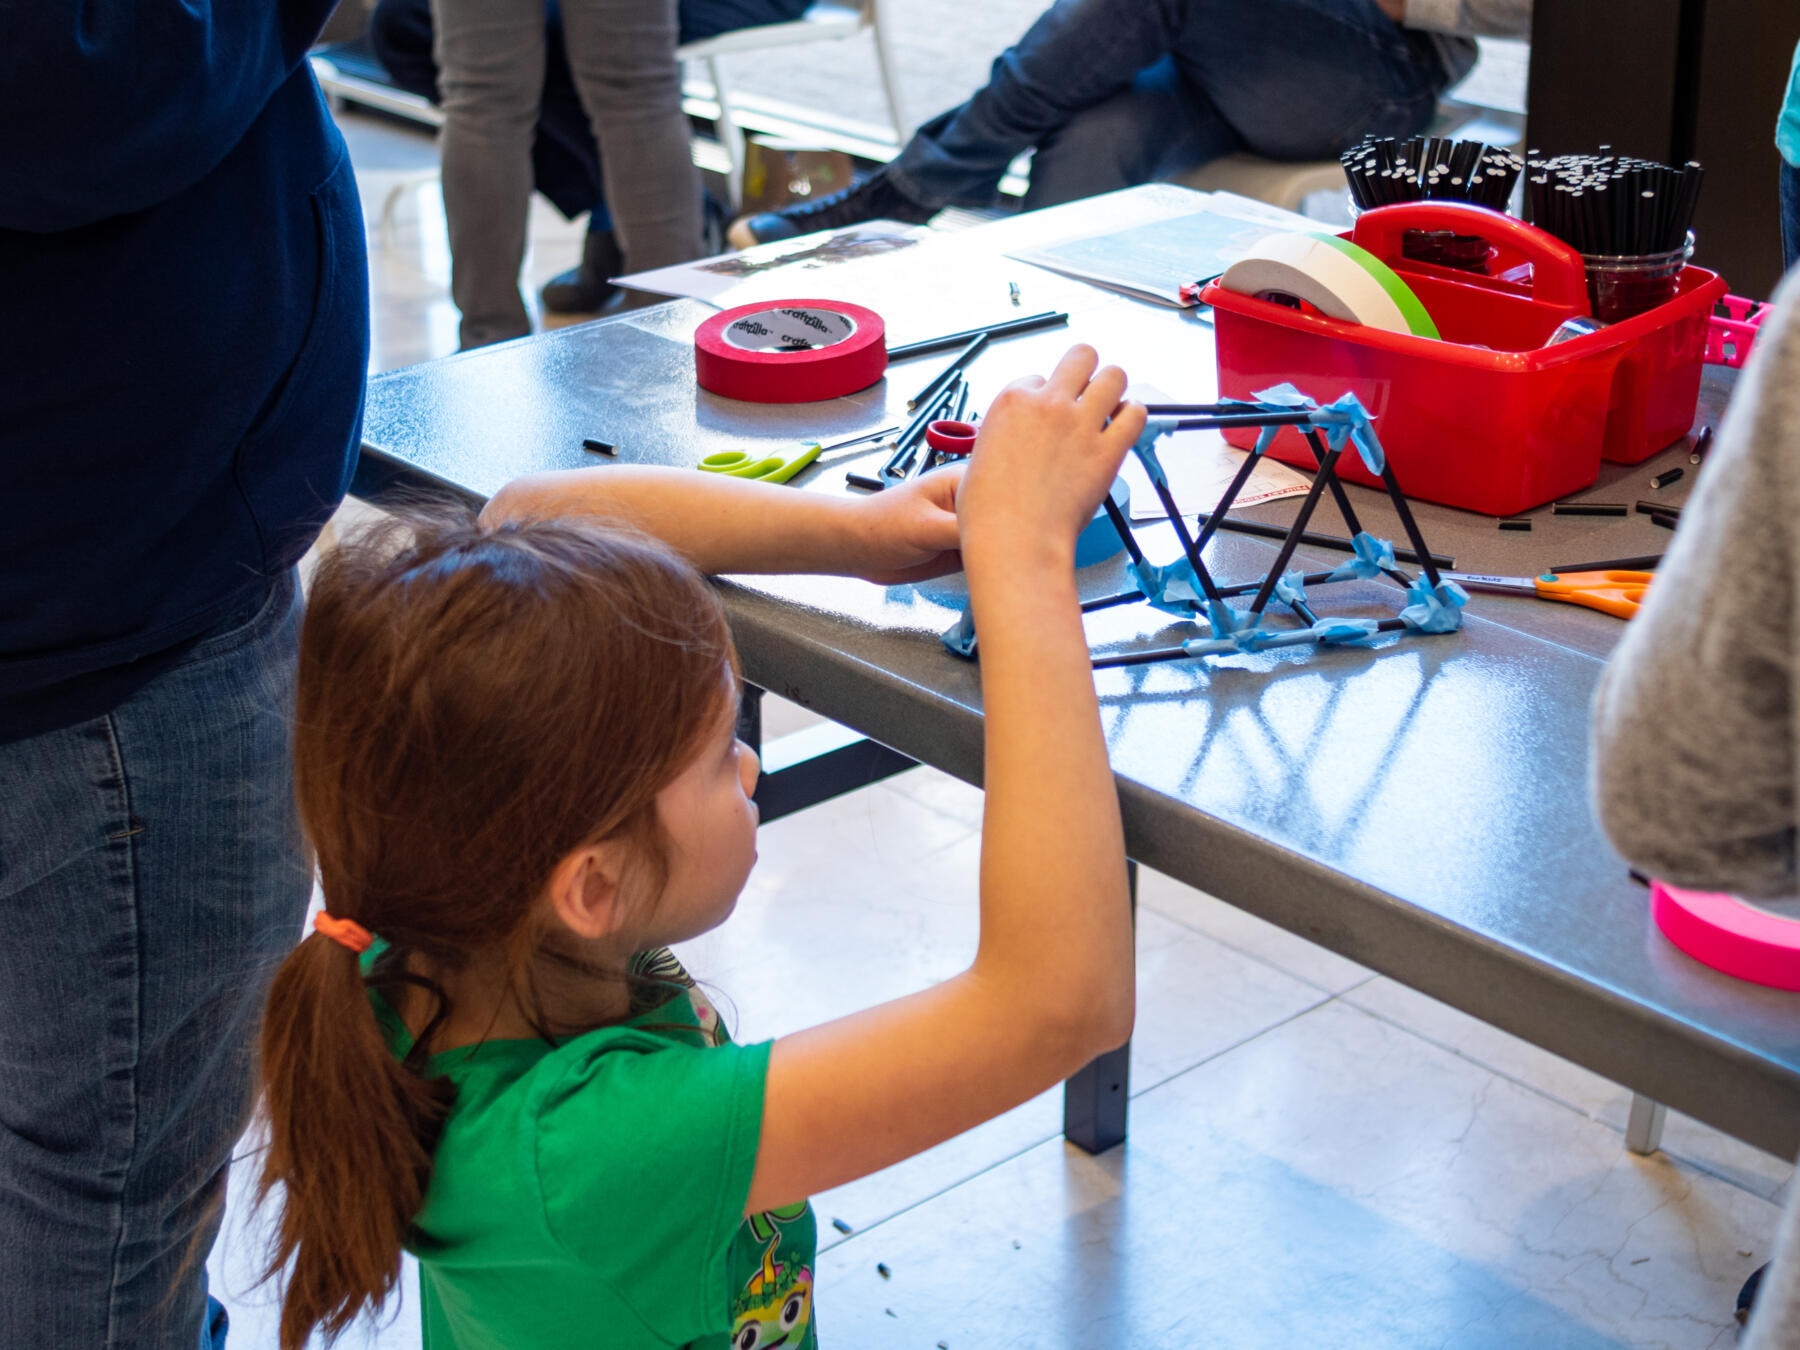 Engineering Fest 2020 February 22-23, 2020 Chicago Architecture Center